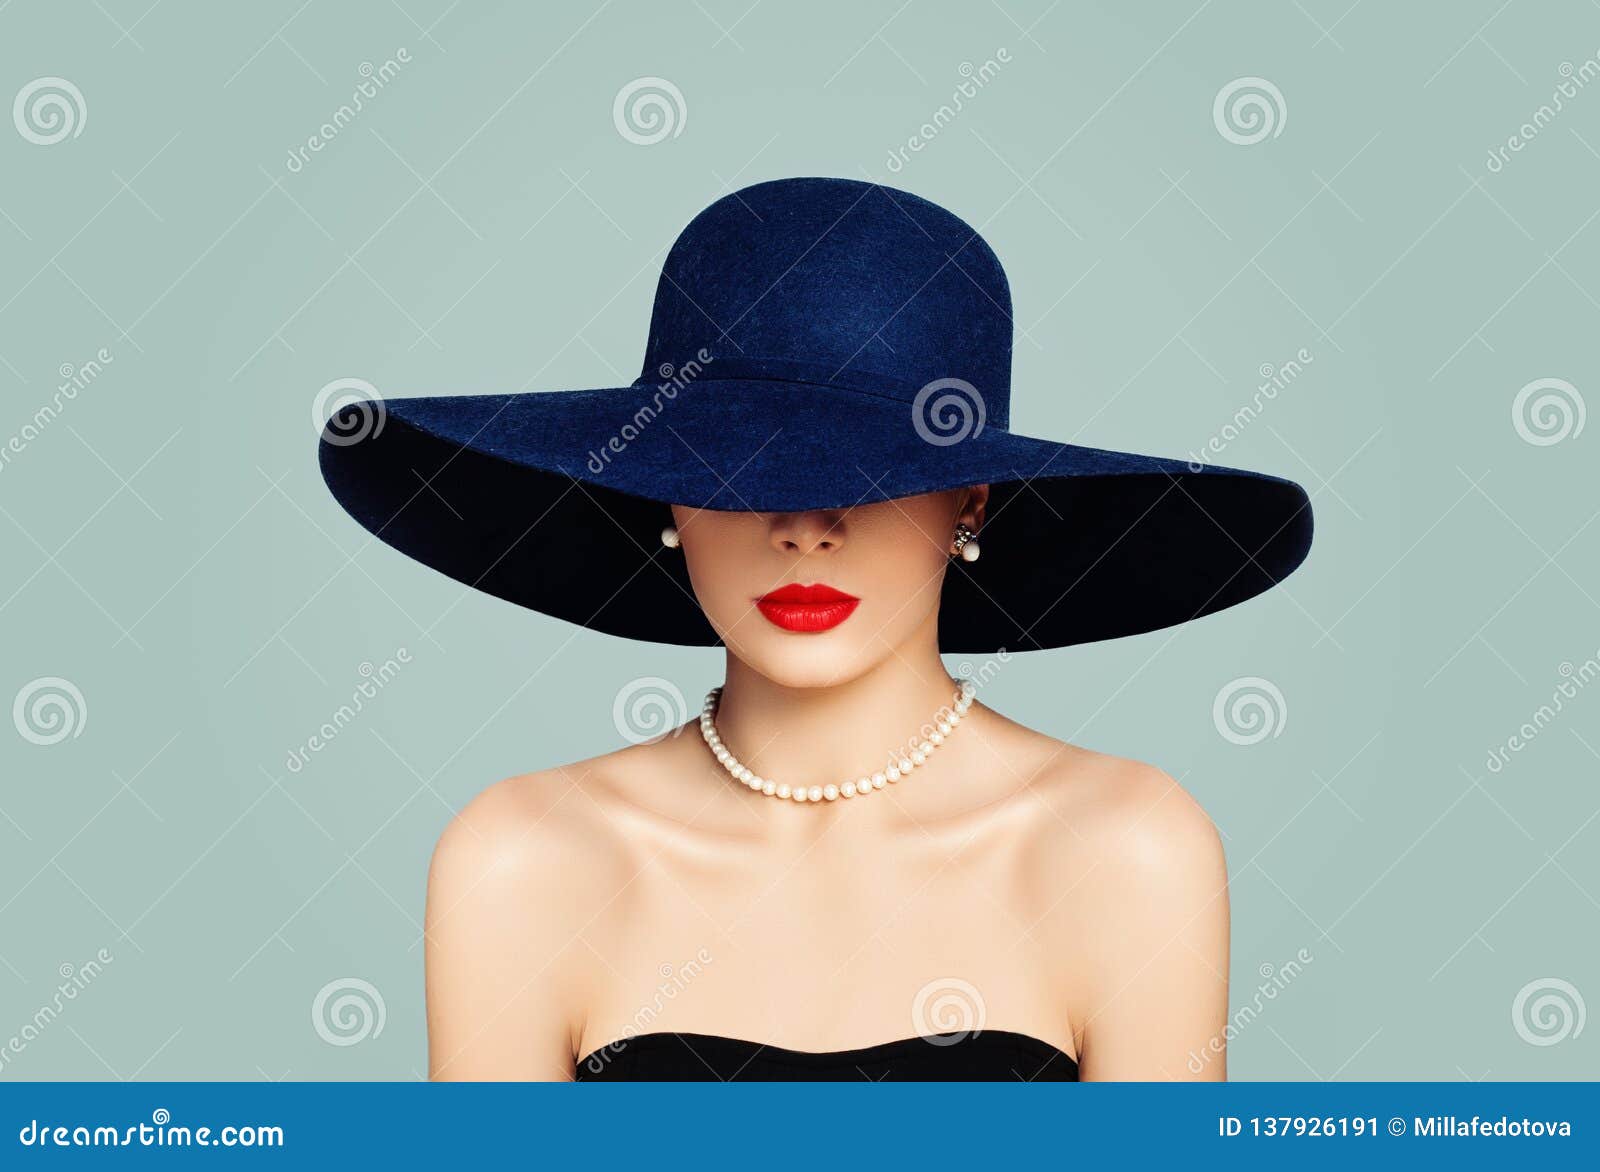 elegant woman fashion model with red lips makeup wearing classic hat and white pearls, portrait